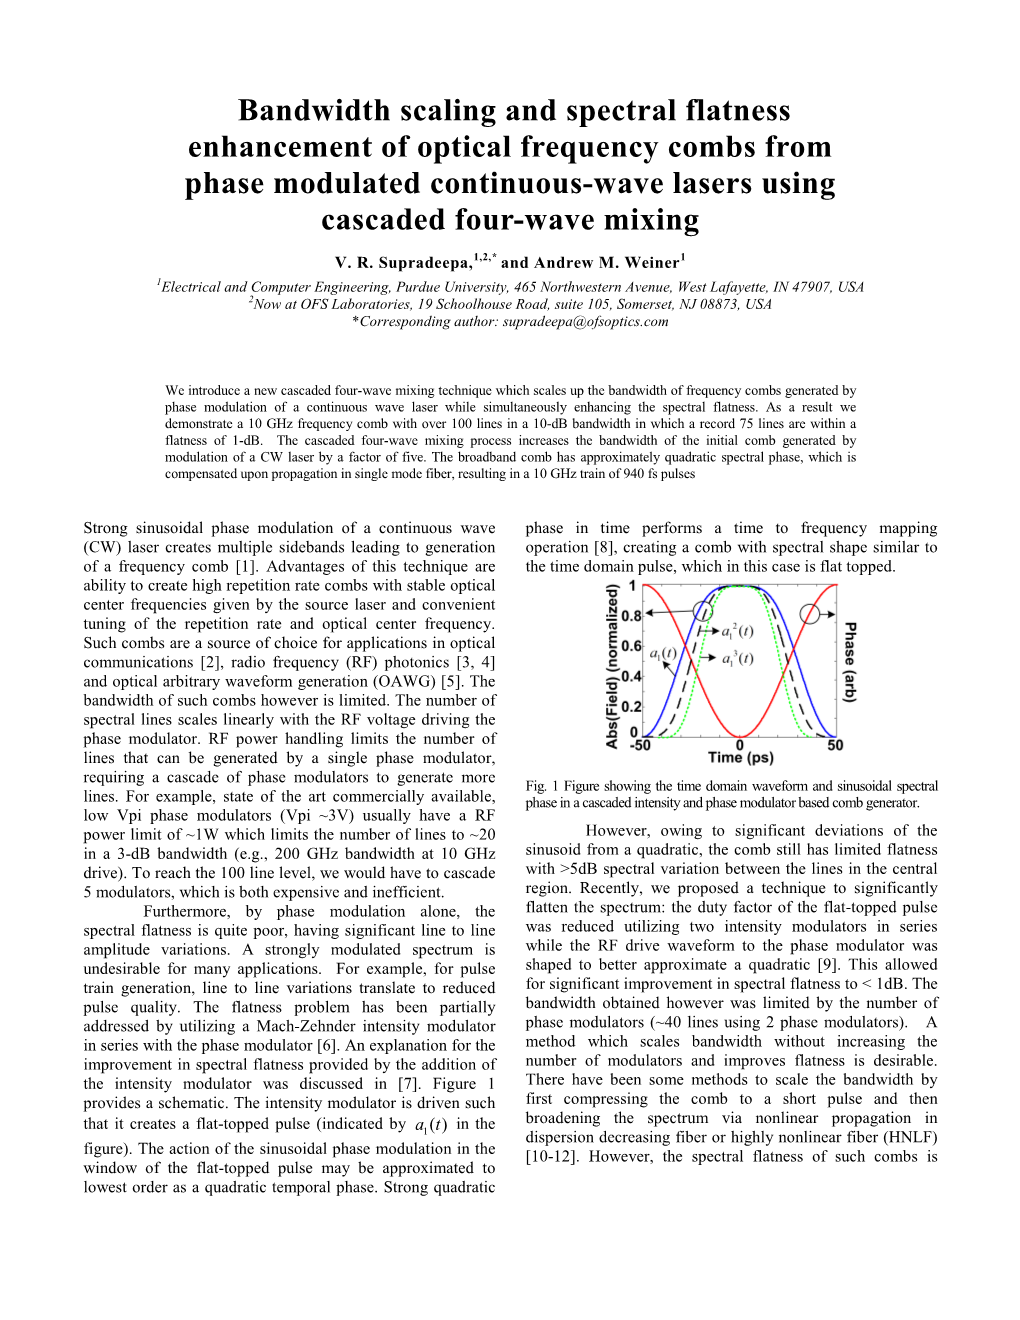 Bandwidth Scaling and Spectral Flatness Enhancement of Optical Frequency Combs from Phase Modulated Continuous-Wave Lasers Using Cascaded Four-Wave Mixing